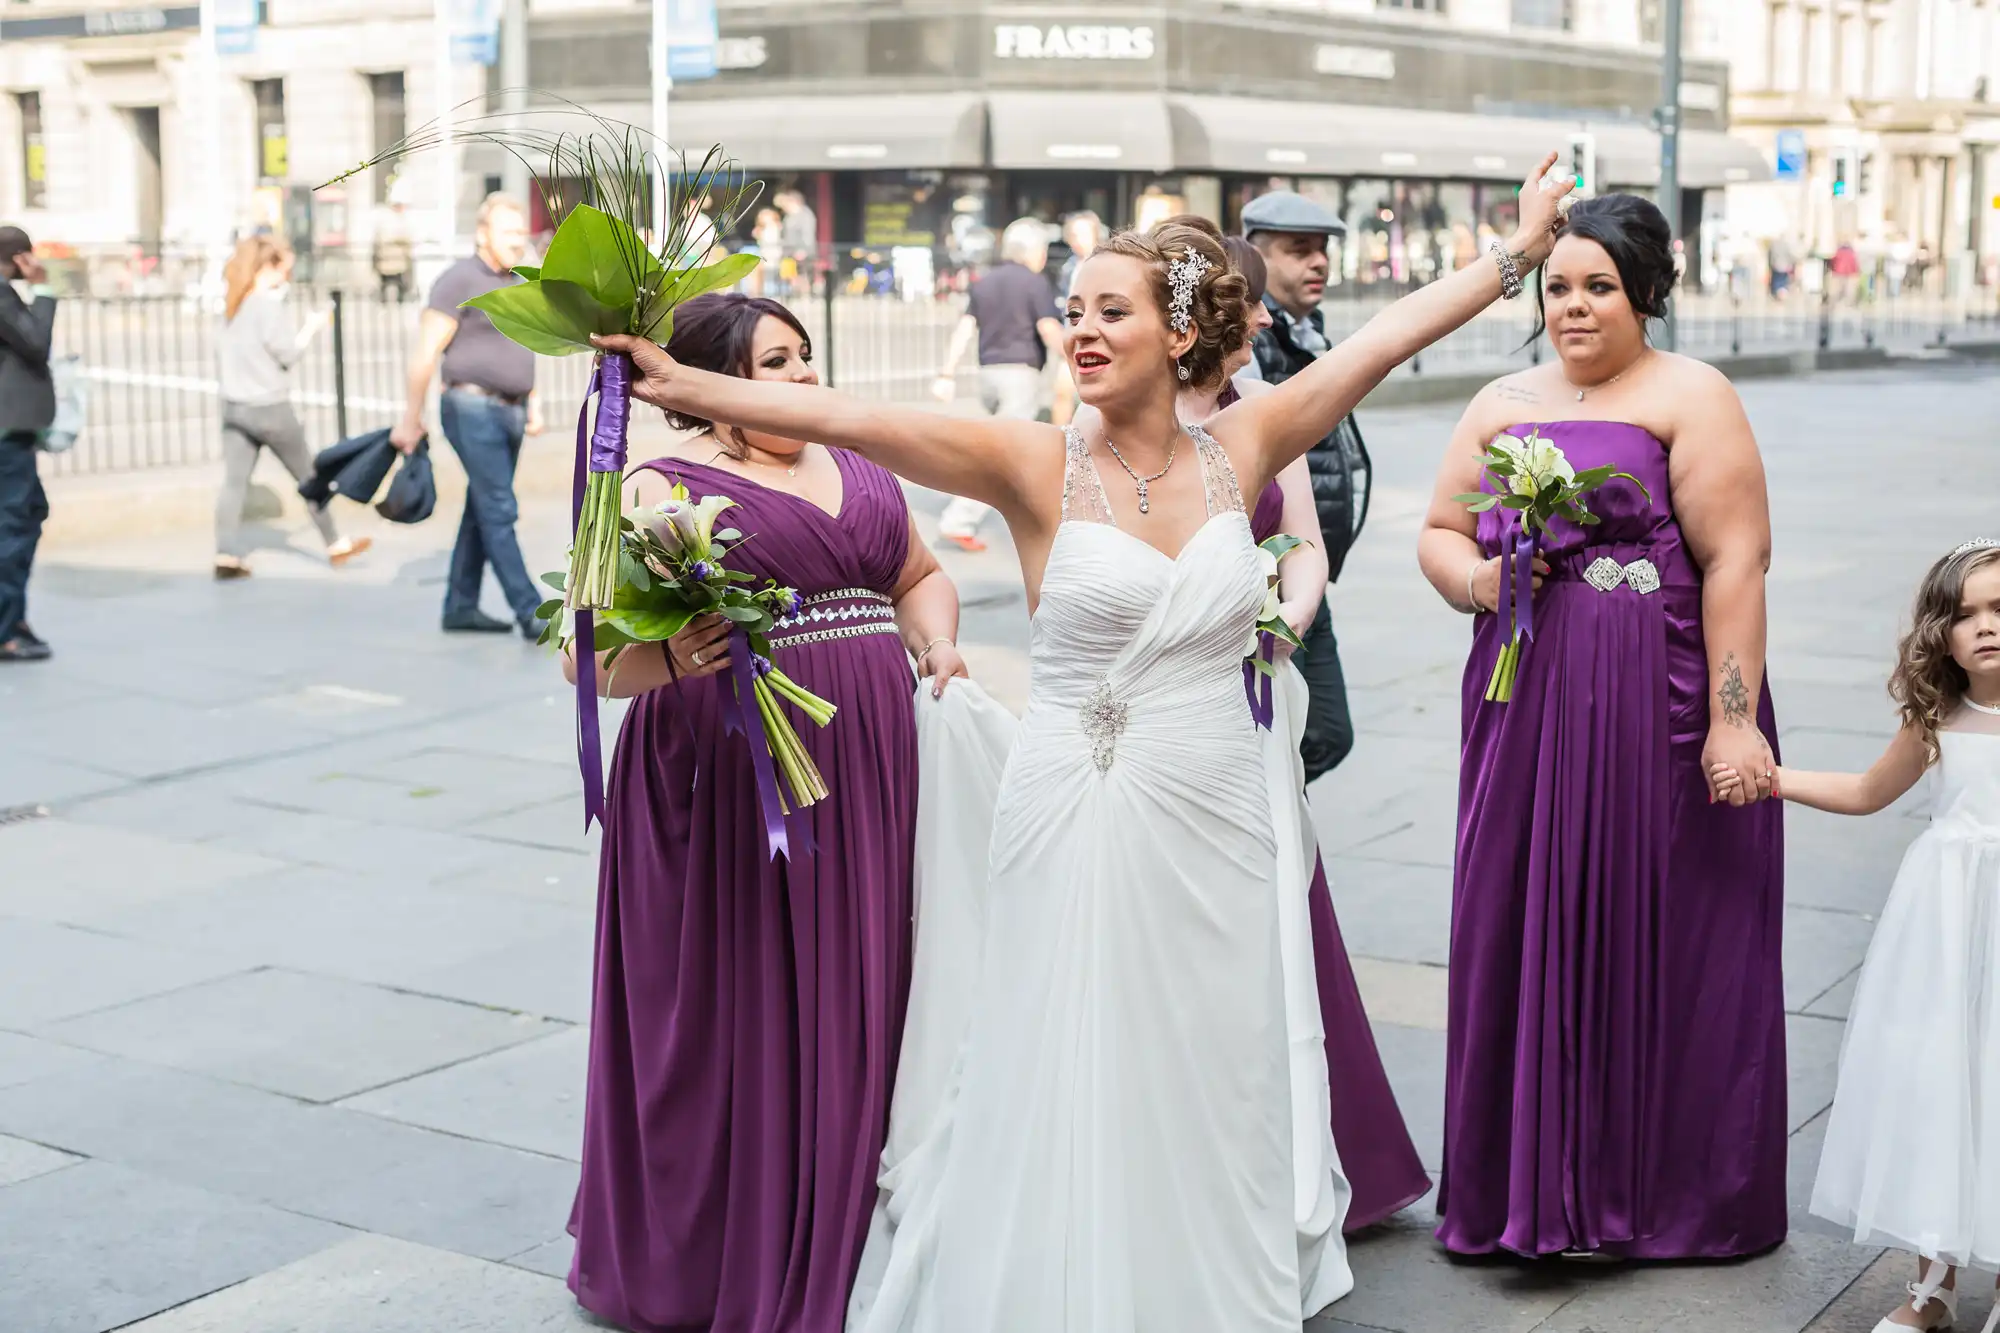 A bride in a white dress and three bridesmaids in purple dresses walking through a busy street, with bystanders in the background.